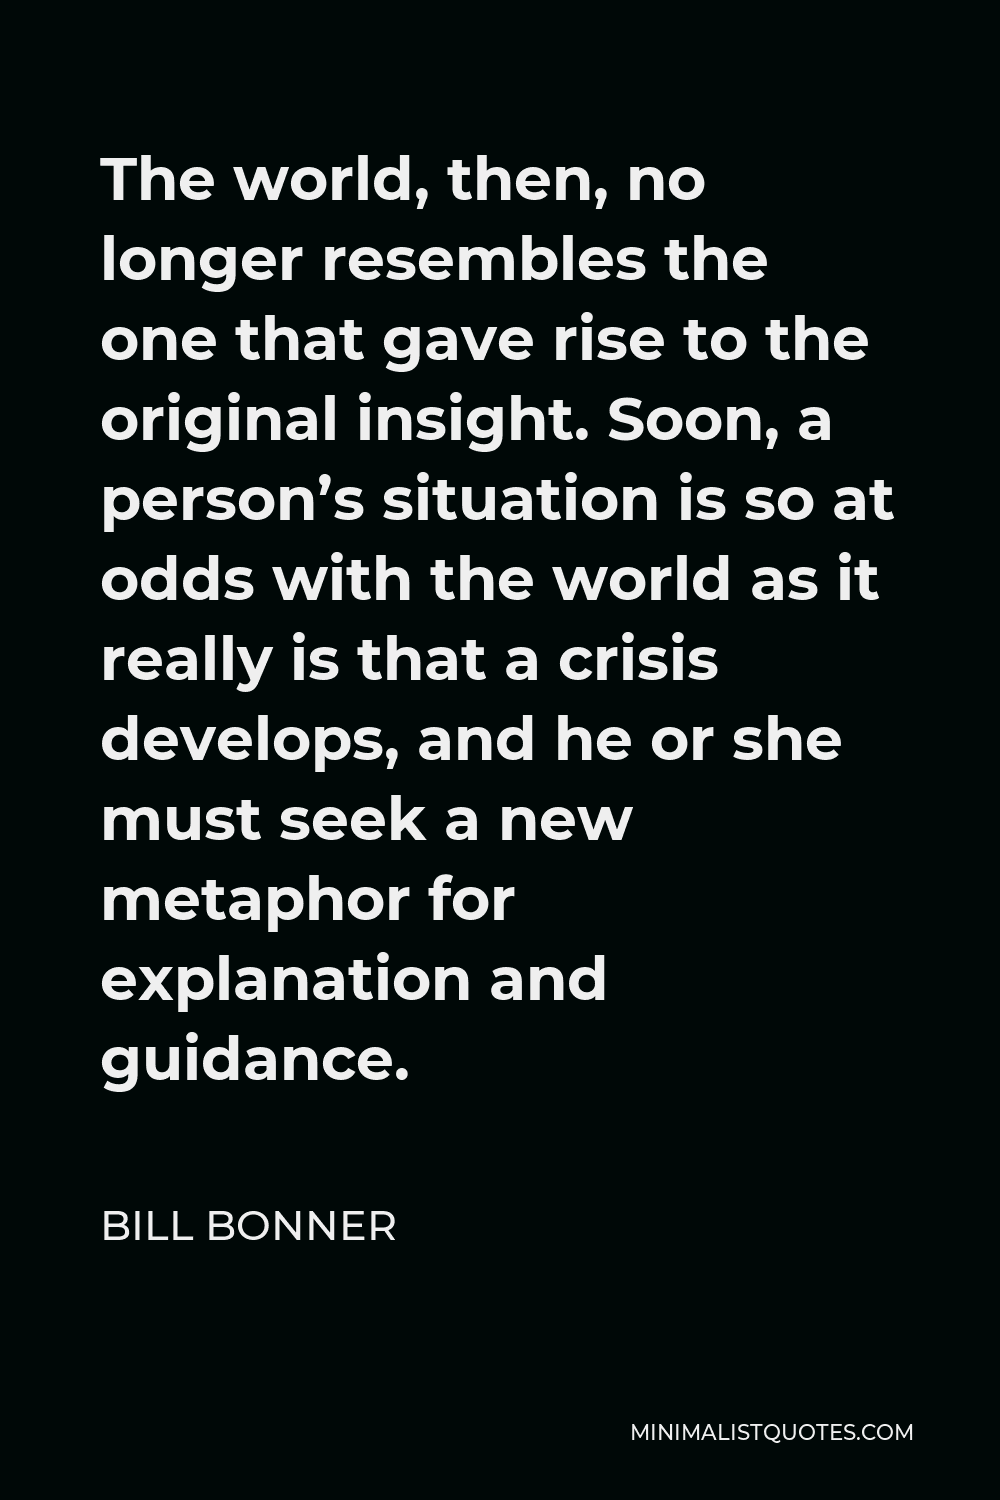 Bill Bonner Quote - The world, then, no longer resembles the one that gave rise to the original insight. Soon, a person’s situation is so at odds with the world as it really is that a crisis develops, and he or she must seek a new metaphor for explanation and guidance.